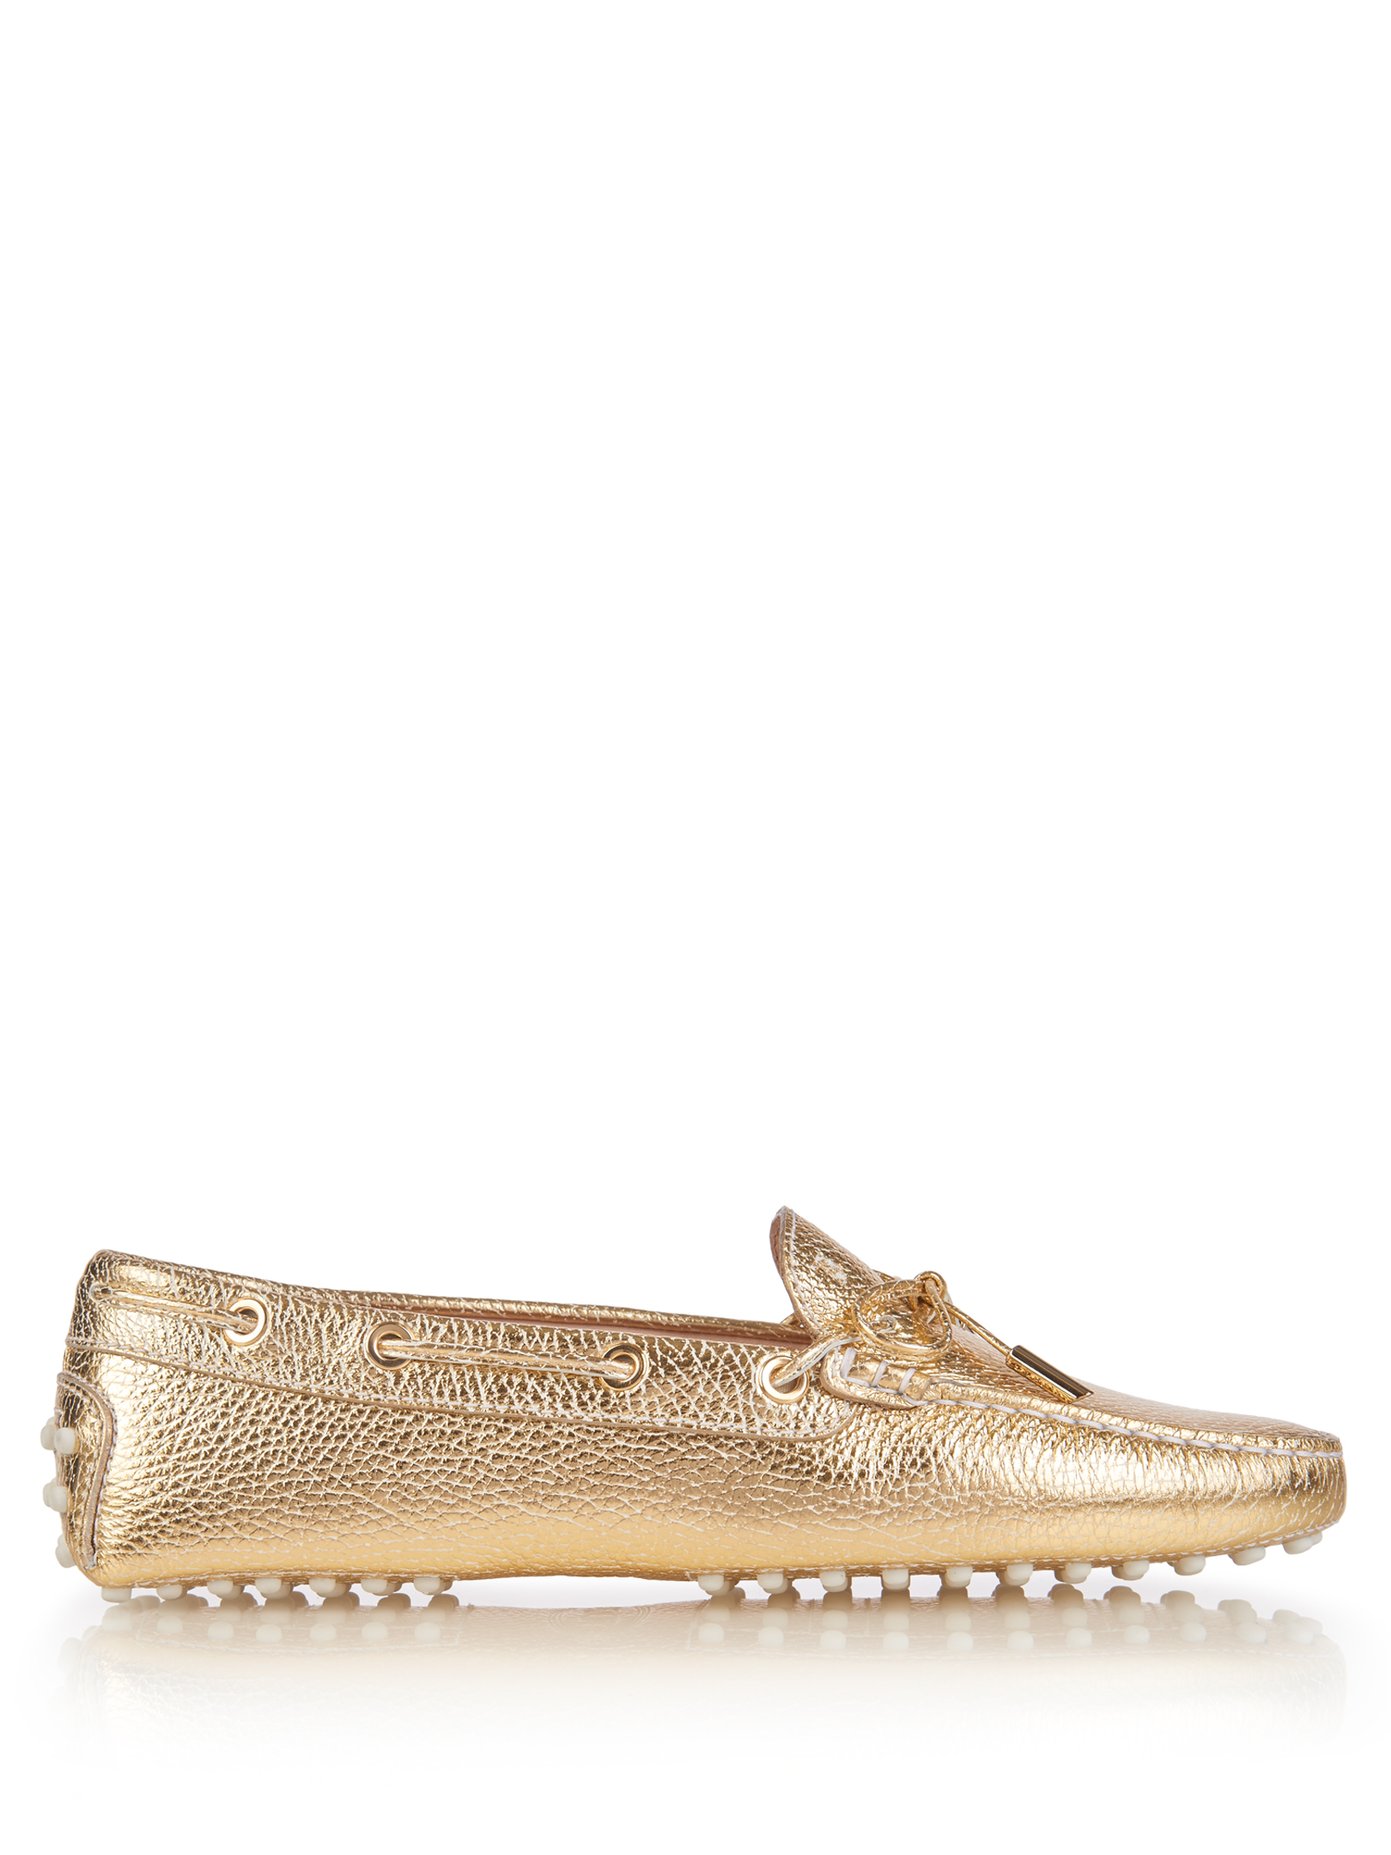 tod's gold loafers